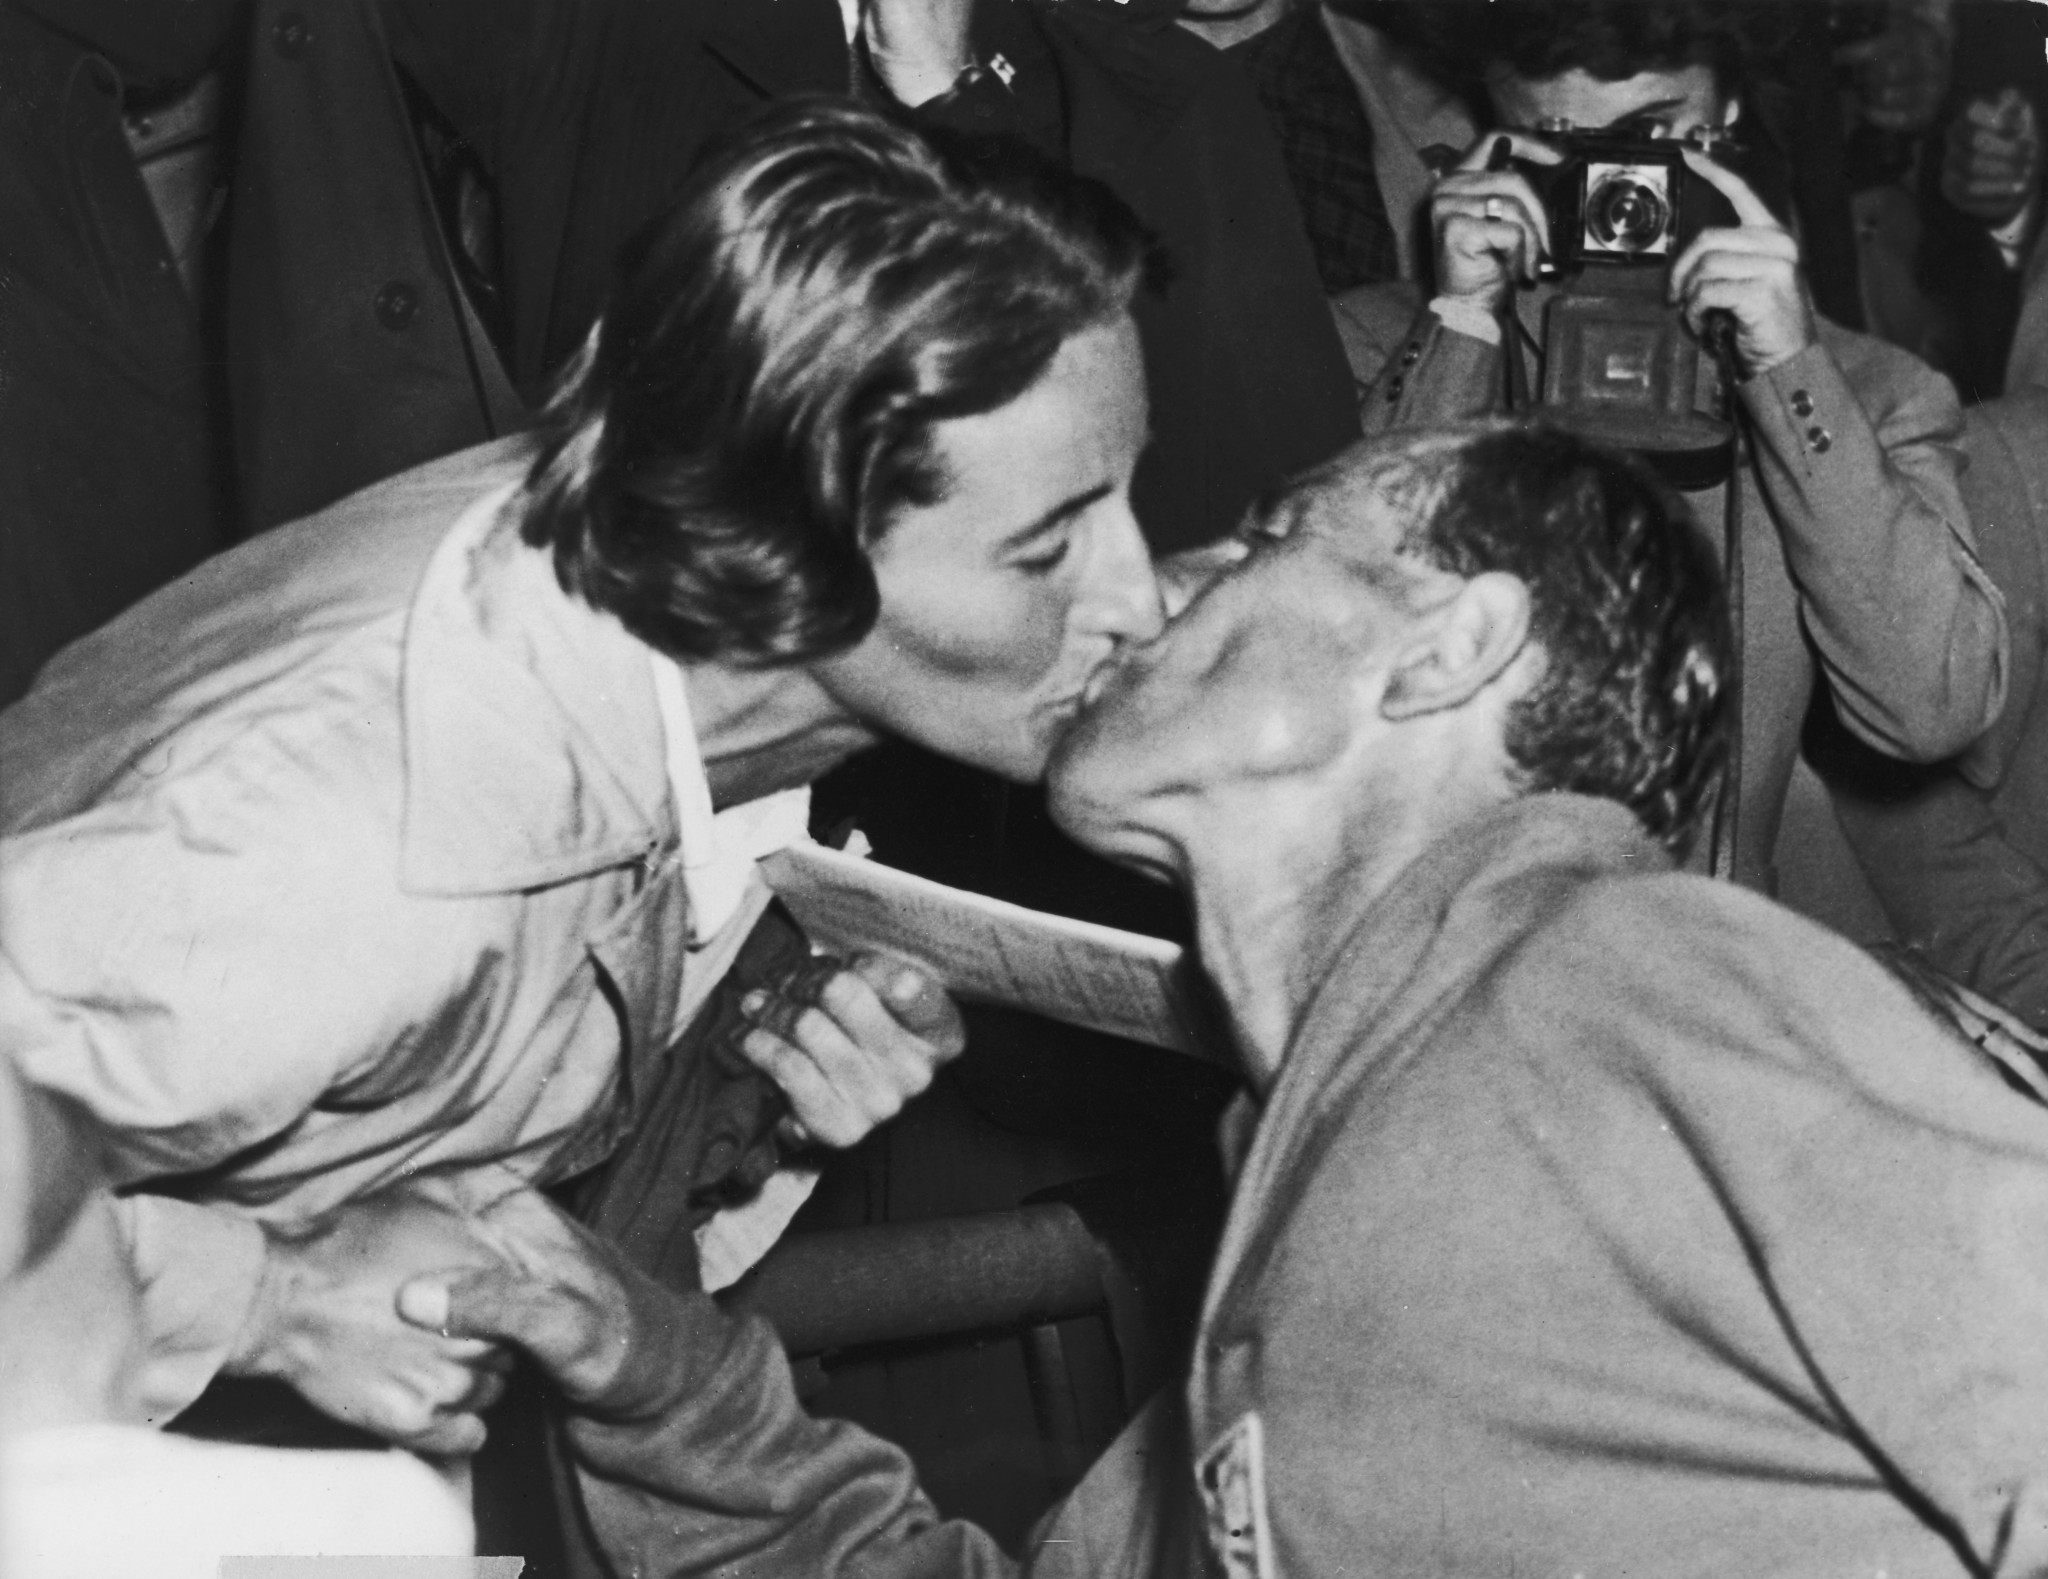 Emil Zatopek's wife Dana, winner of the Olympic javelin at Helsinki 1952, congratulates her husband after he had won his third gold medal in the marathon ©Getty Images